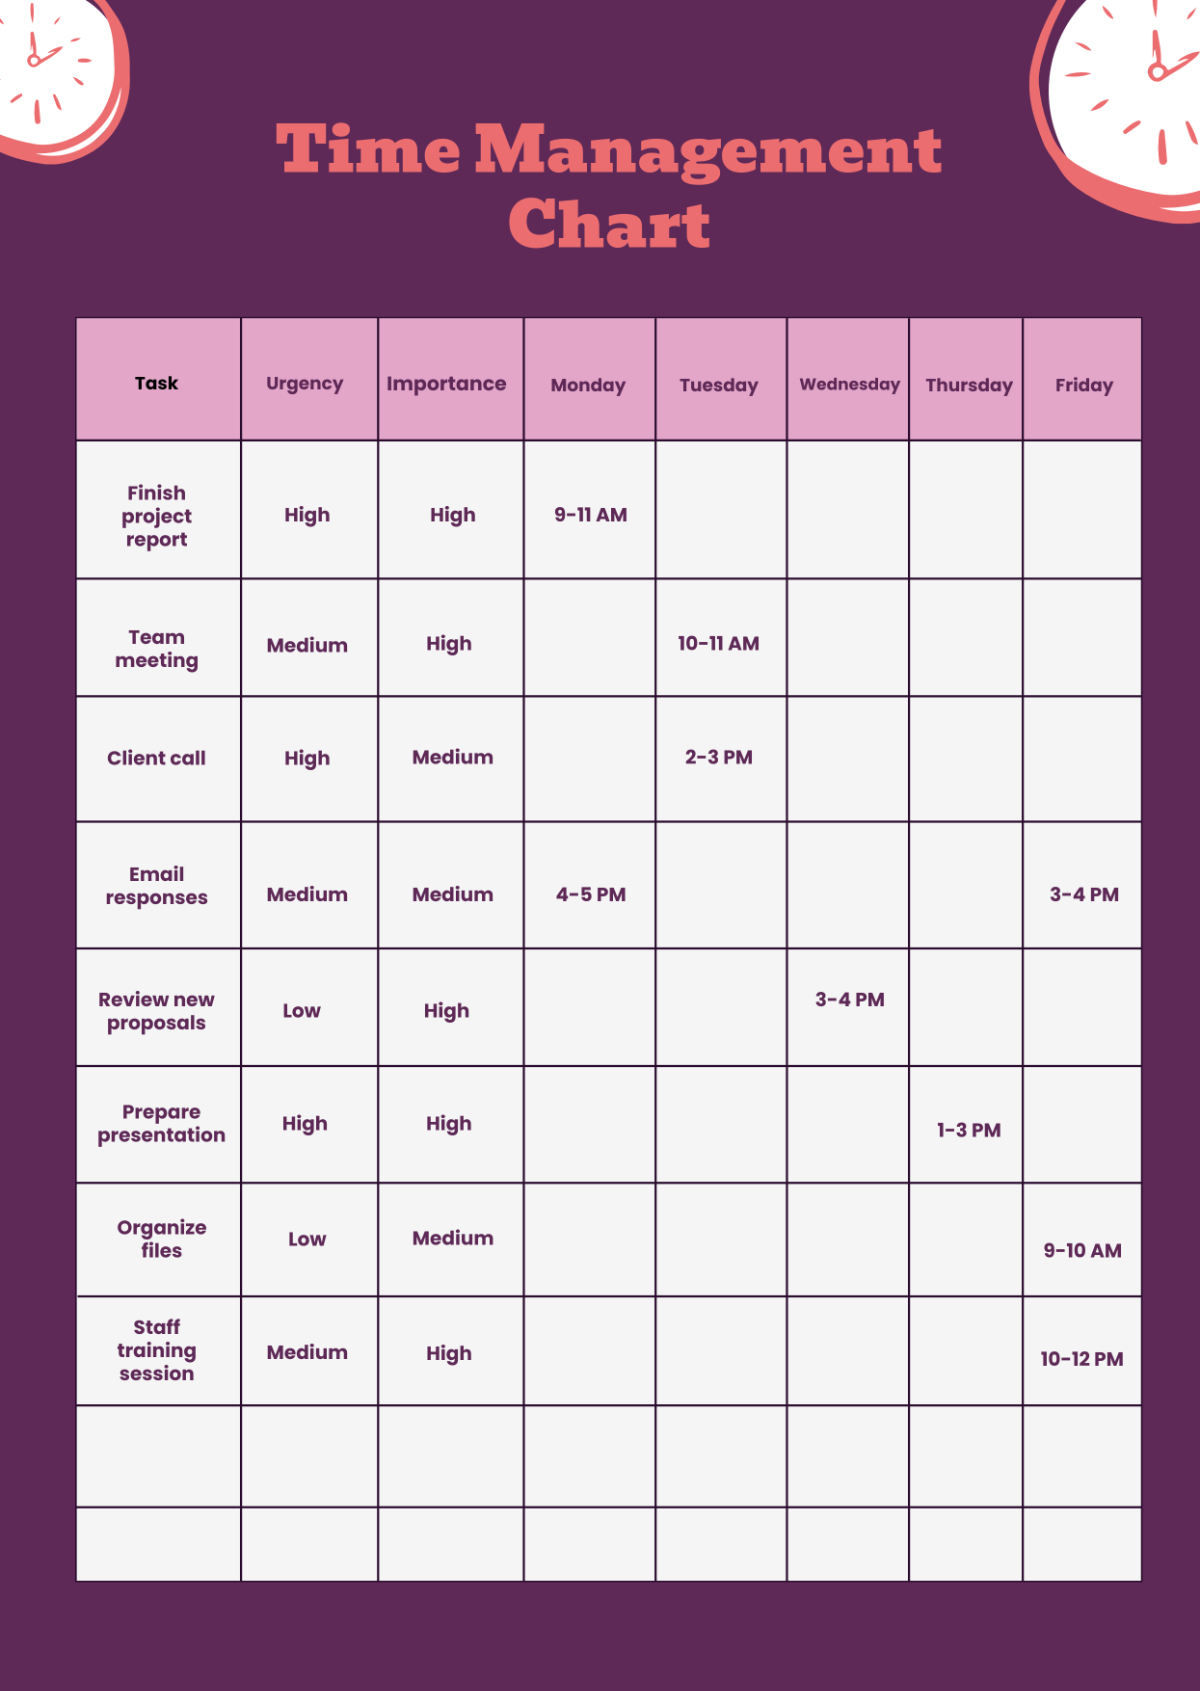 Time management Chart